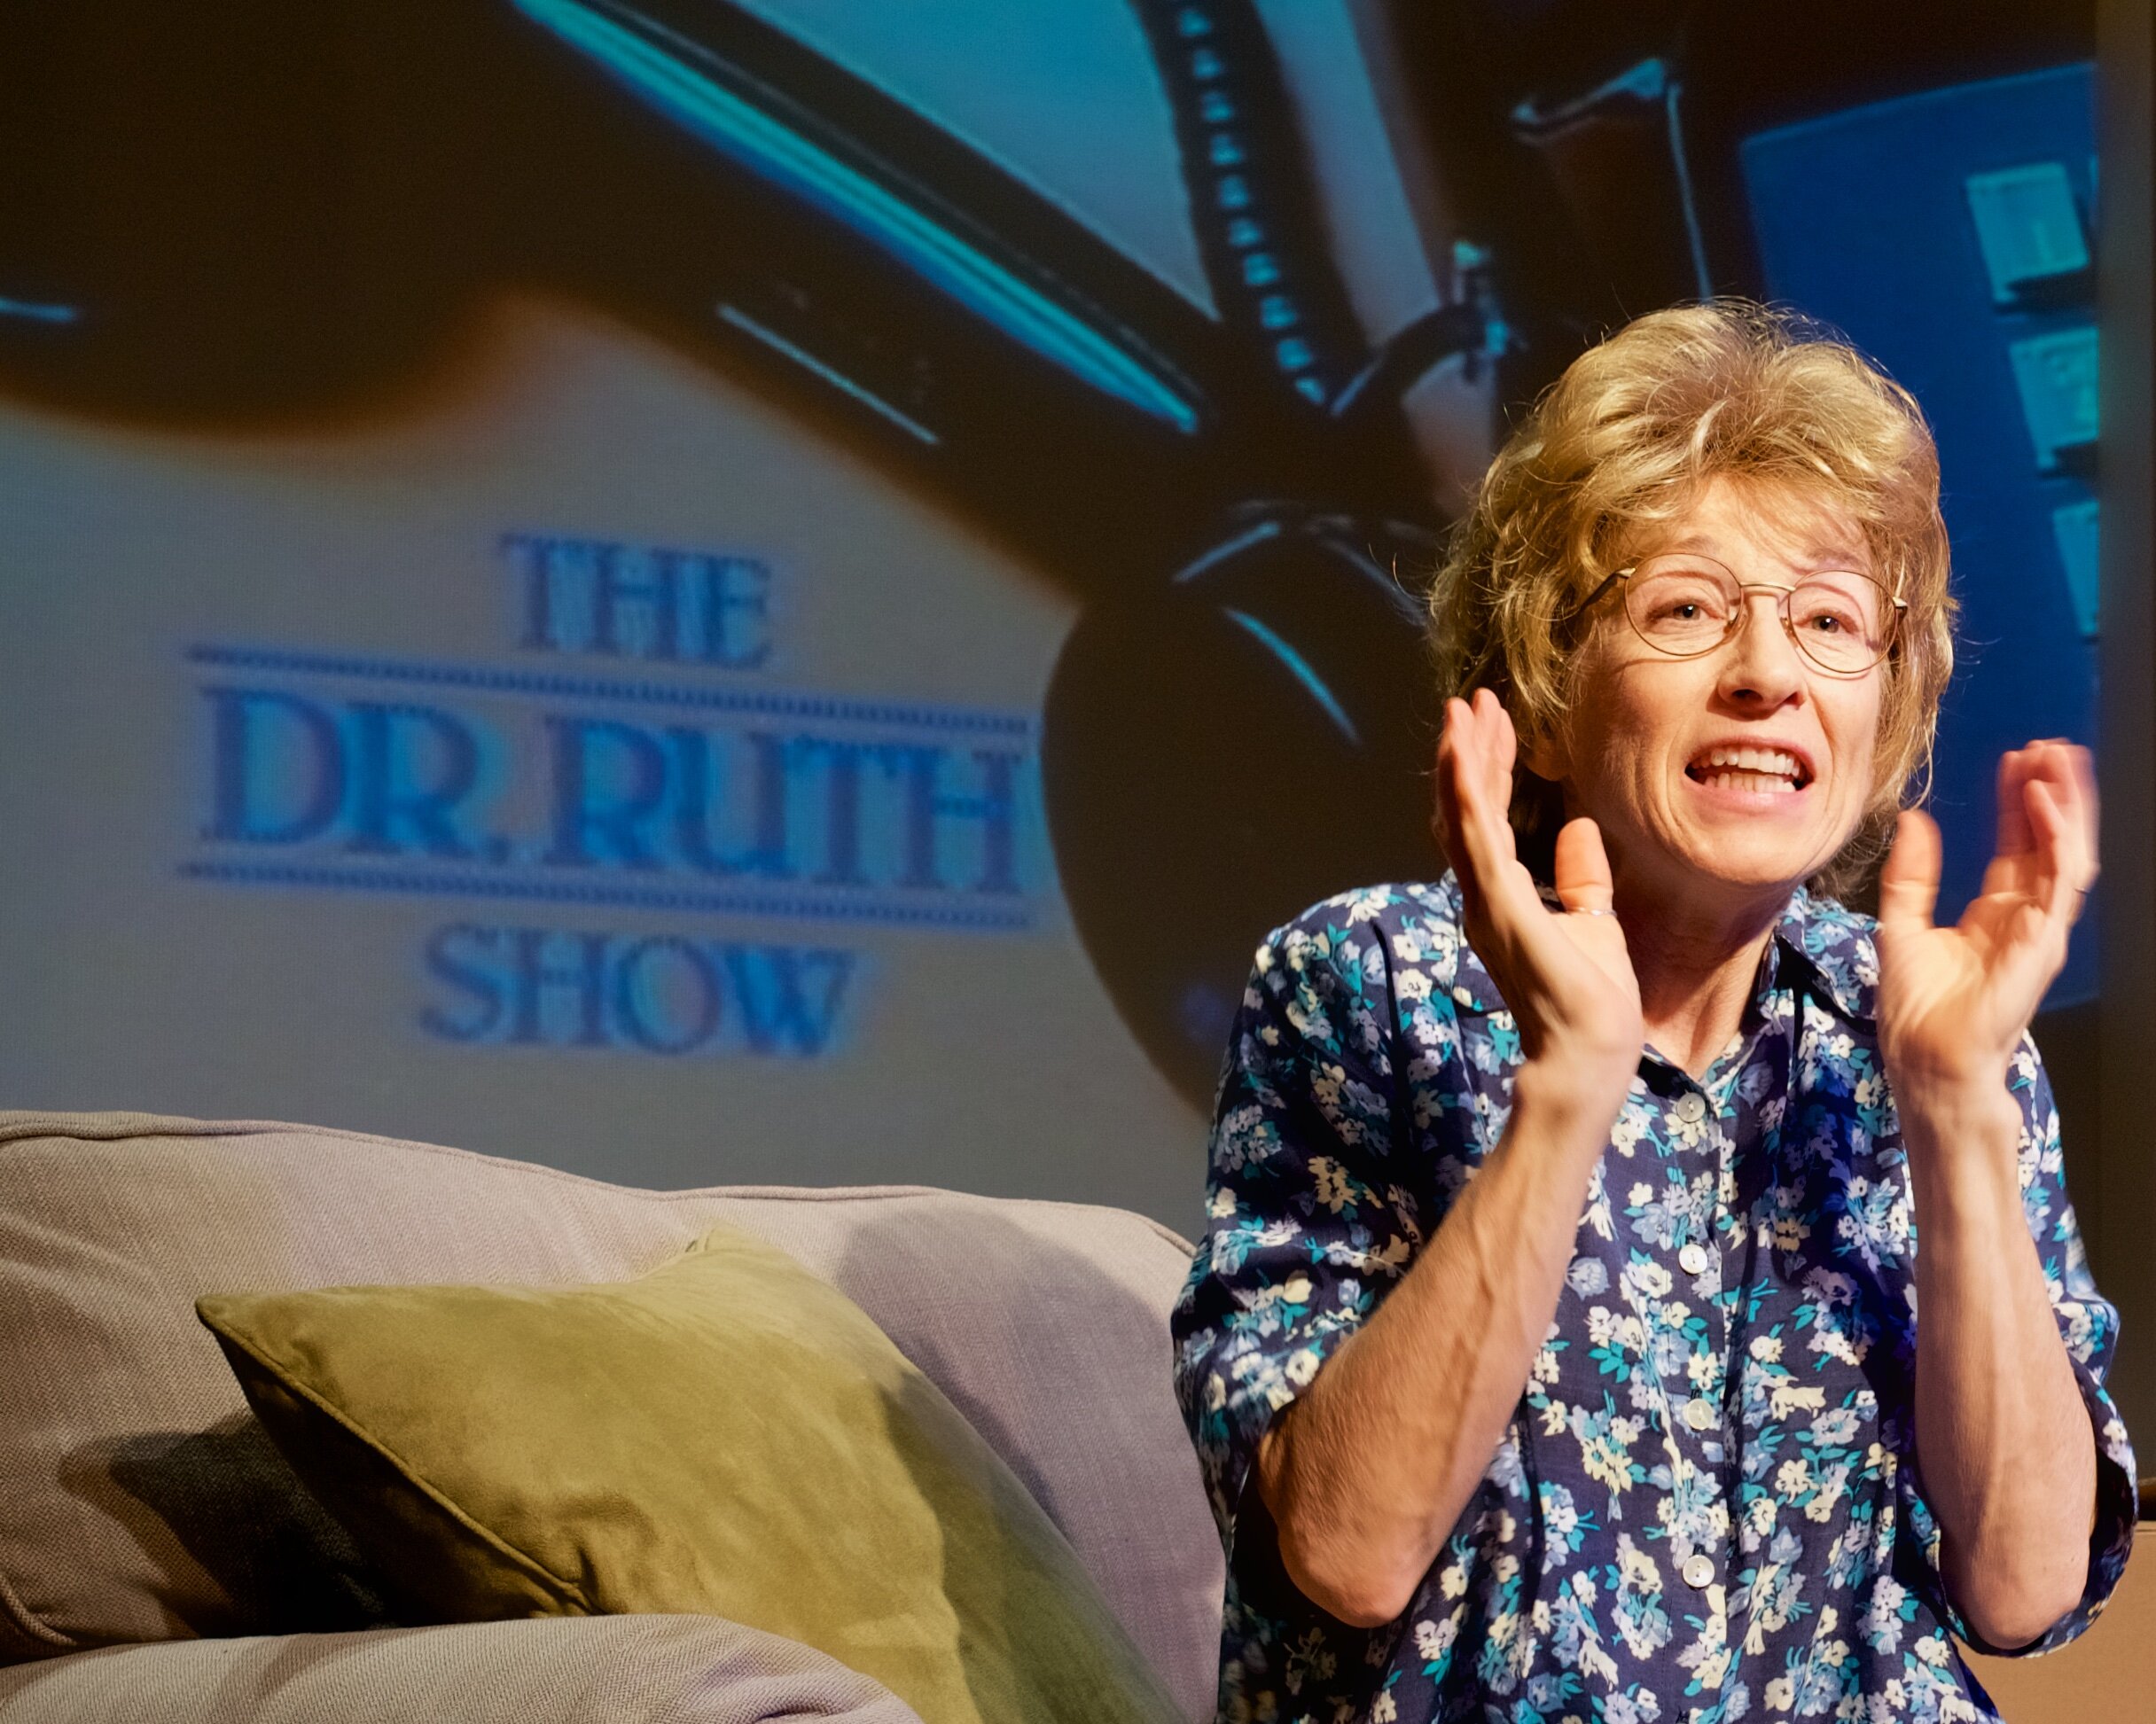 BECOMING DR RUTH - with Anne O'Sullivan  NEW REPERTORY THEATRE